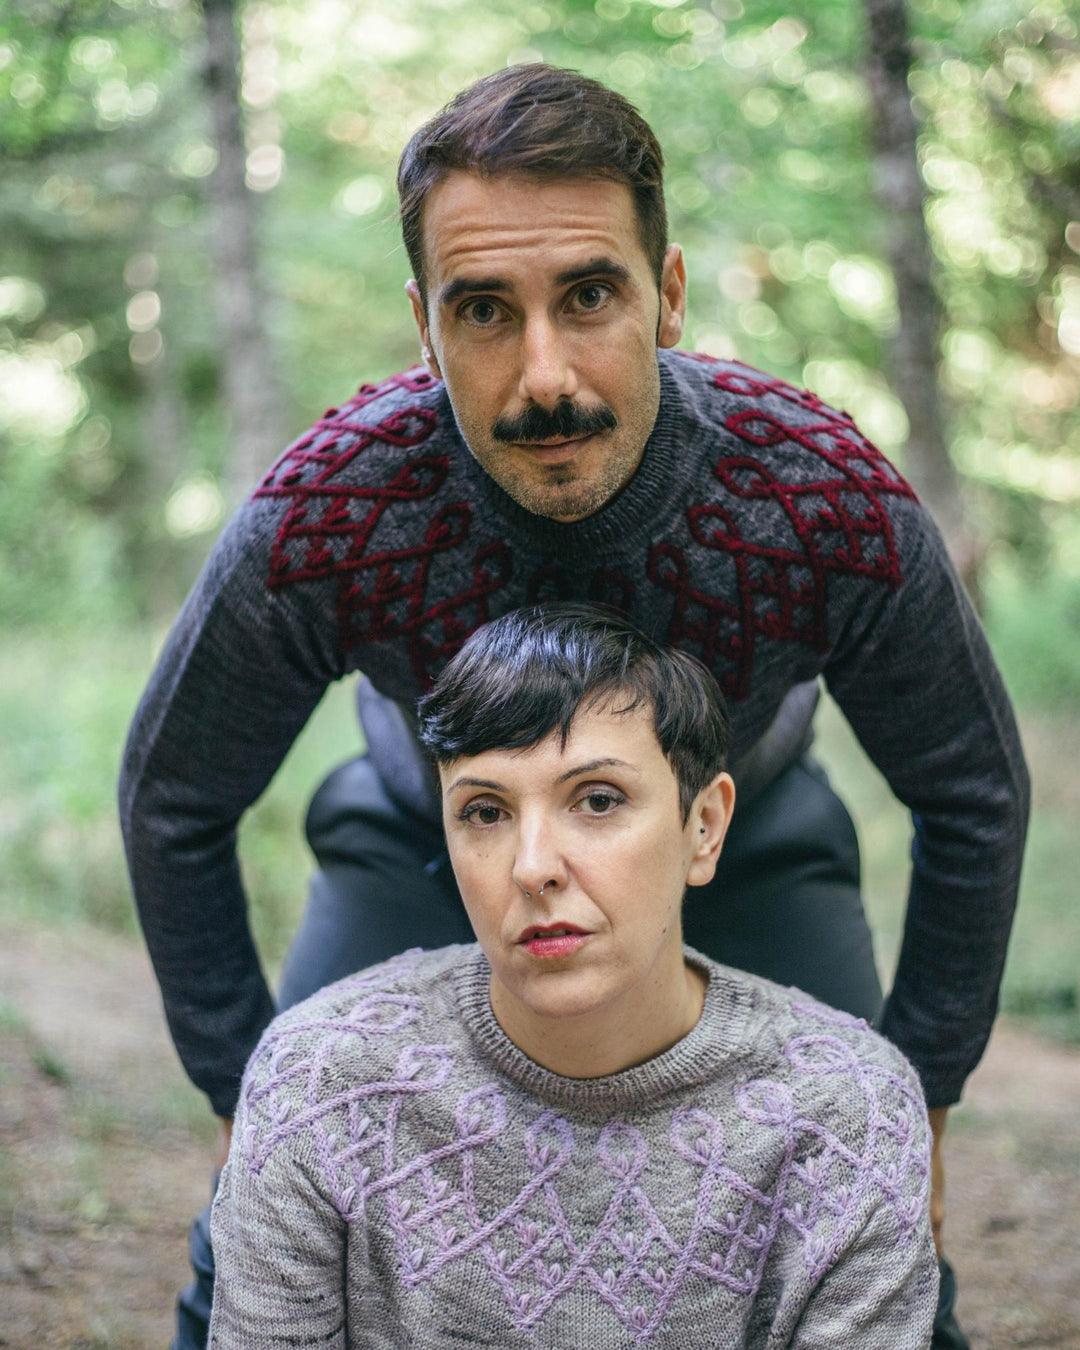 A man and a woman wearing colorwork sweaters. His is dark gray and red and hers is light gray and lilac.